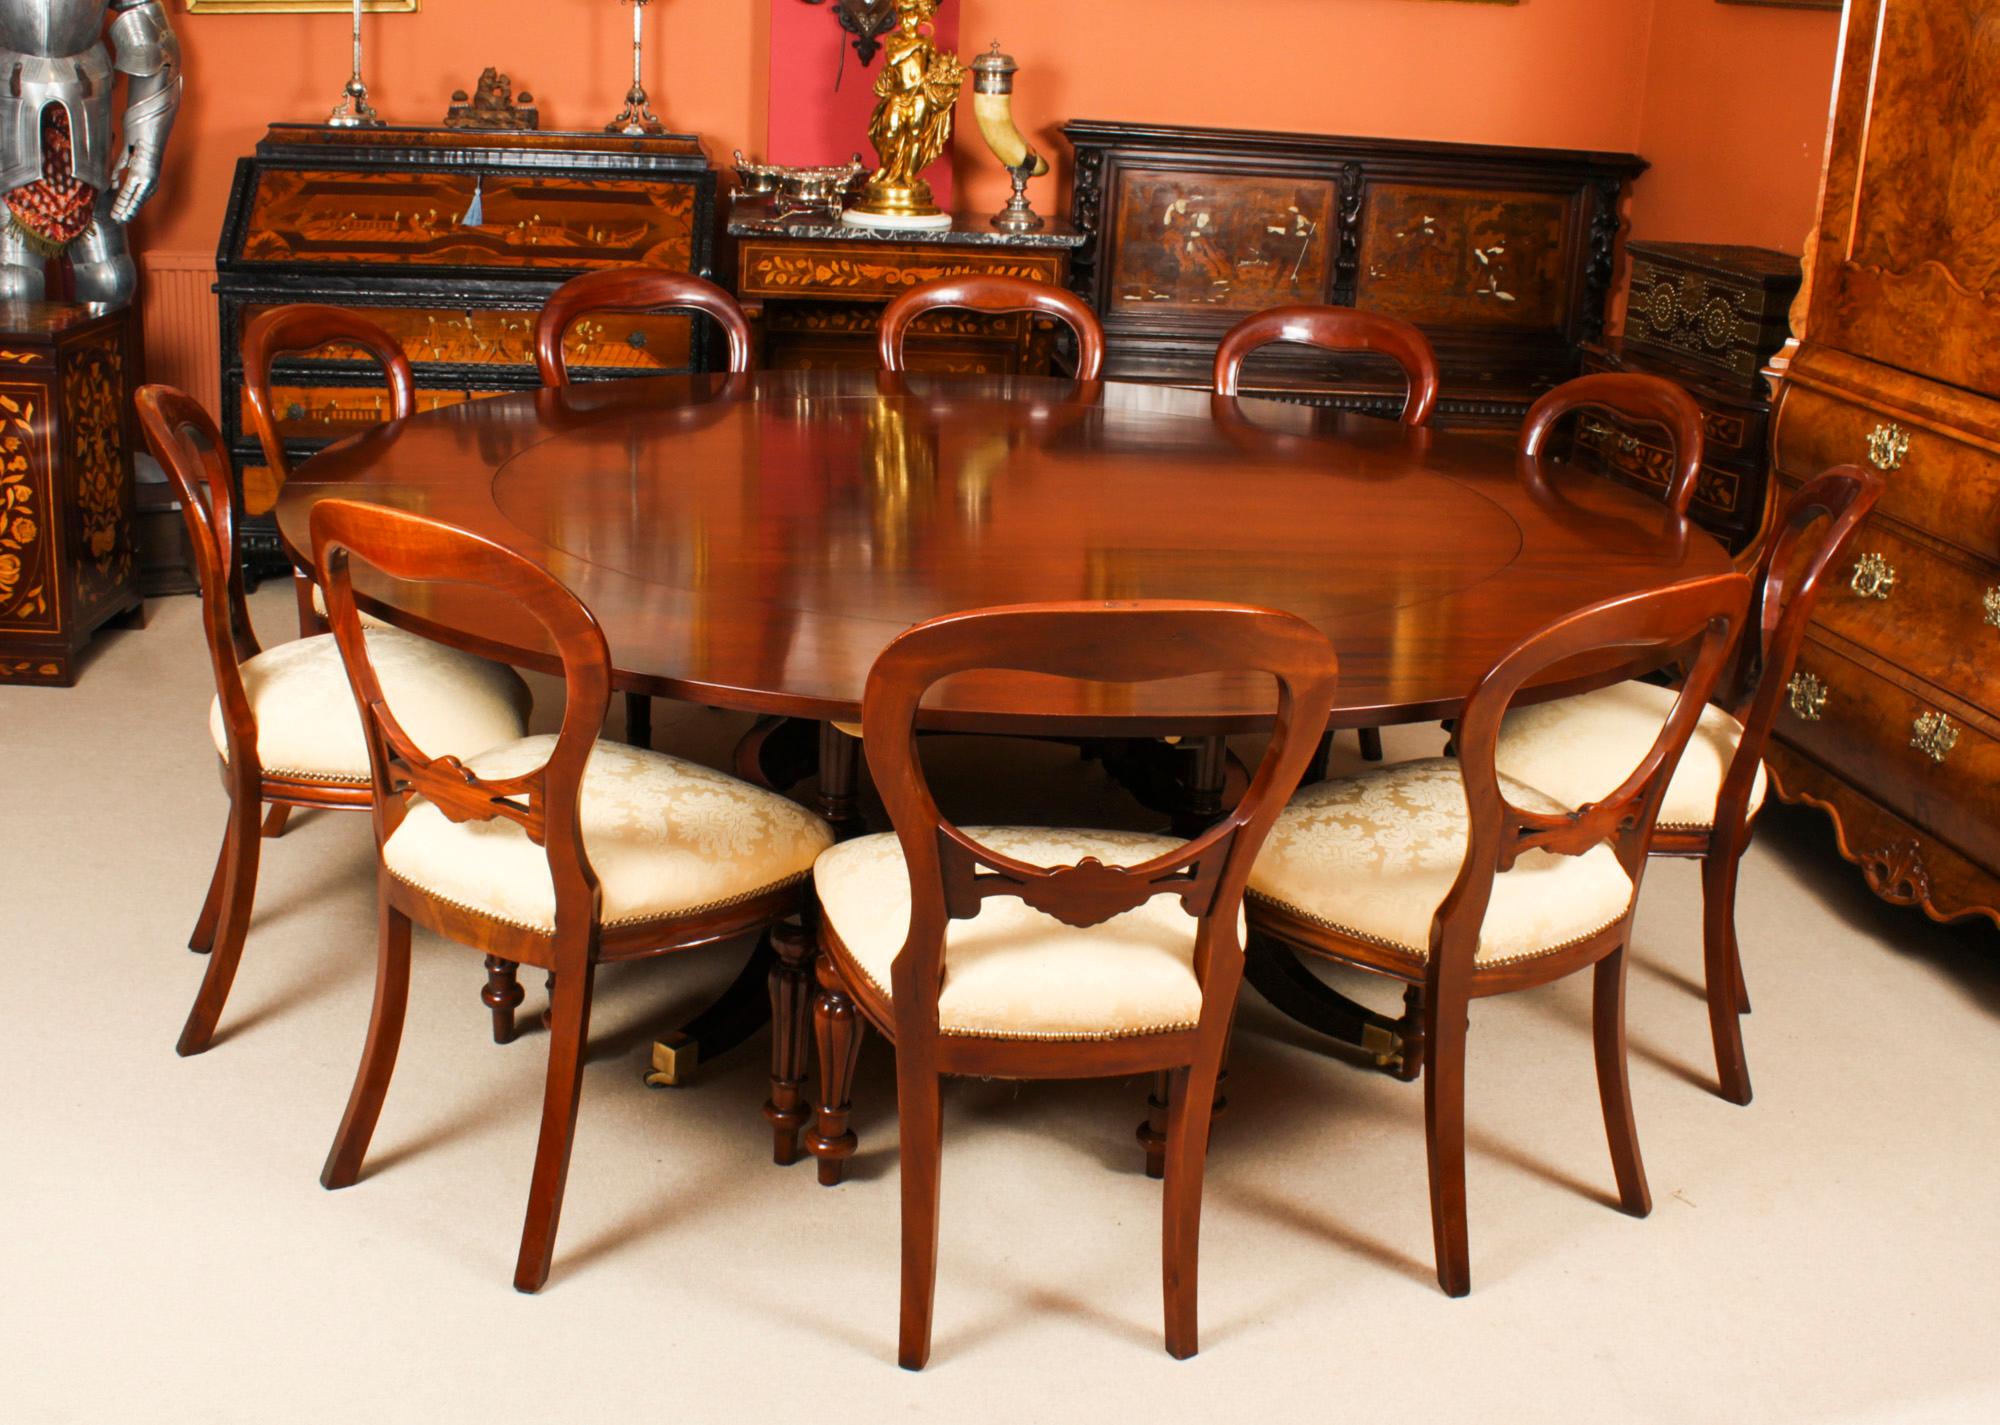 This is a beautiful Regency Revival Jupe style dining table and leaf holder by Arthur Brett, mid 20th Century in date.

The table has a solid mahogany top with five peripheral leaves that can be added around the circumference when required. It is